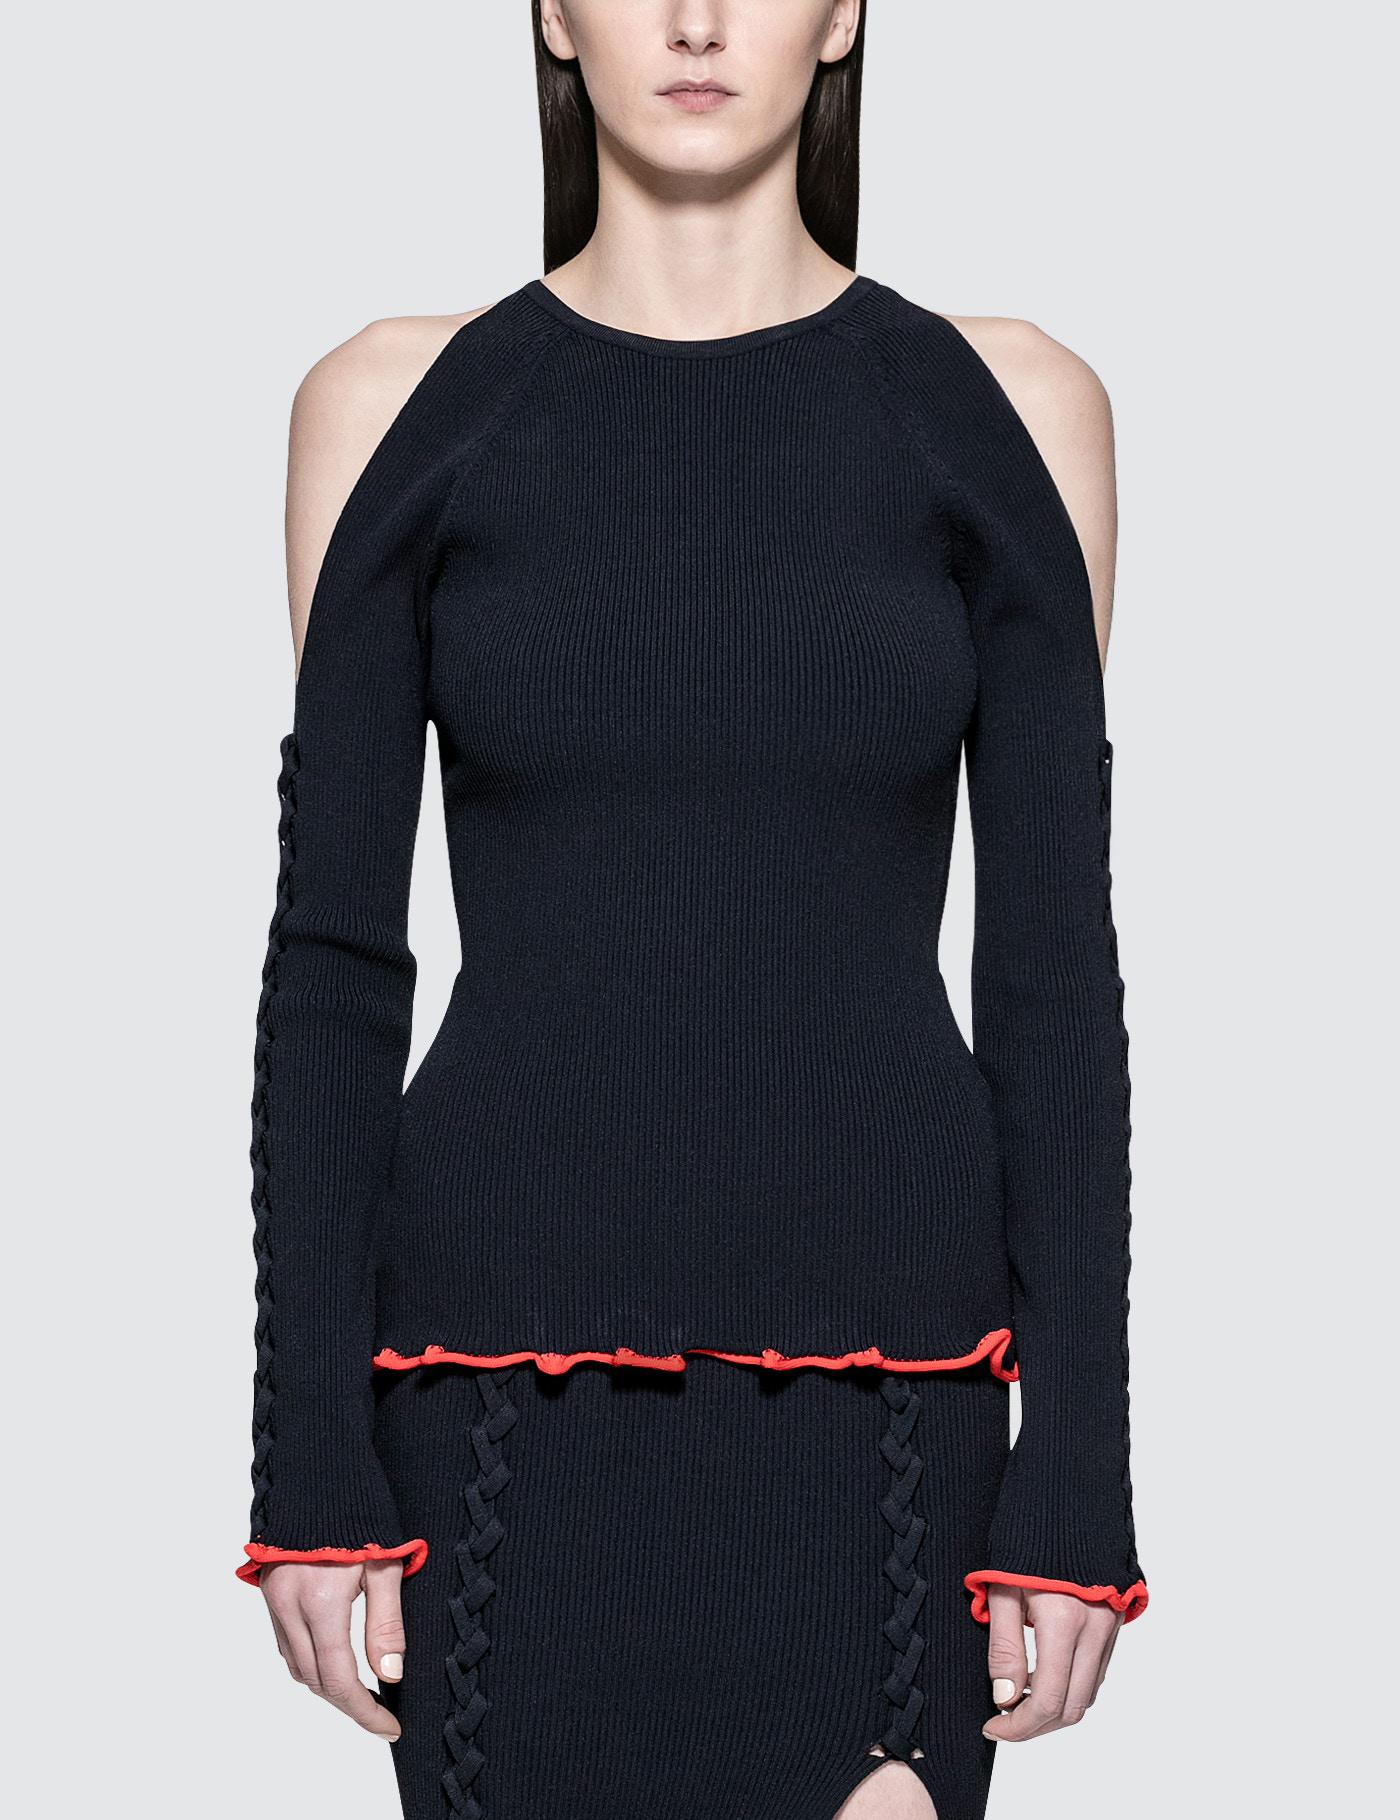 Lyst - Opening Ceremony Criss Cross L/s Top in Blue